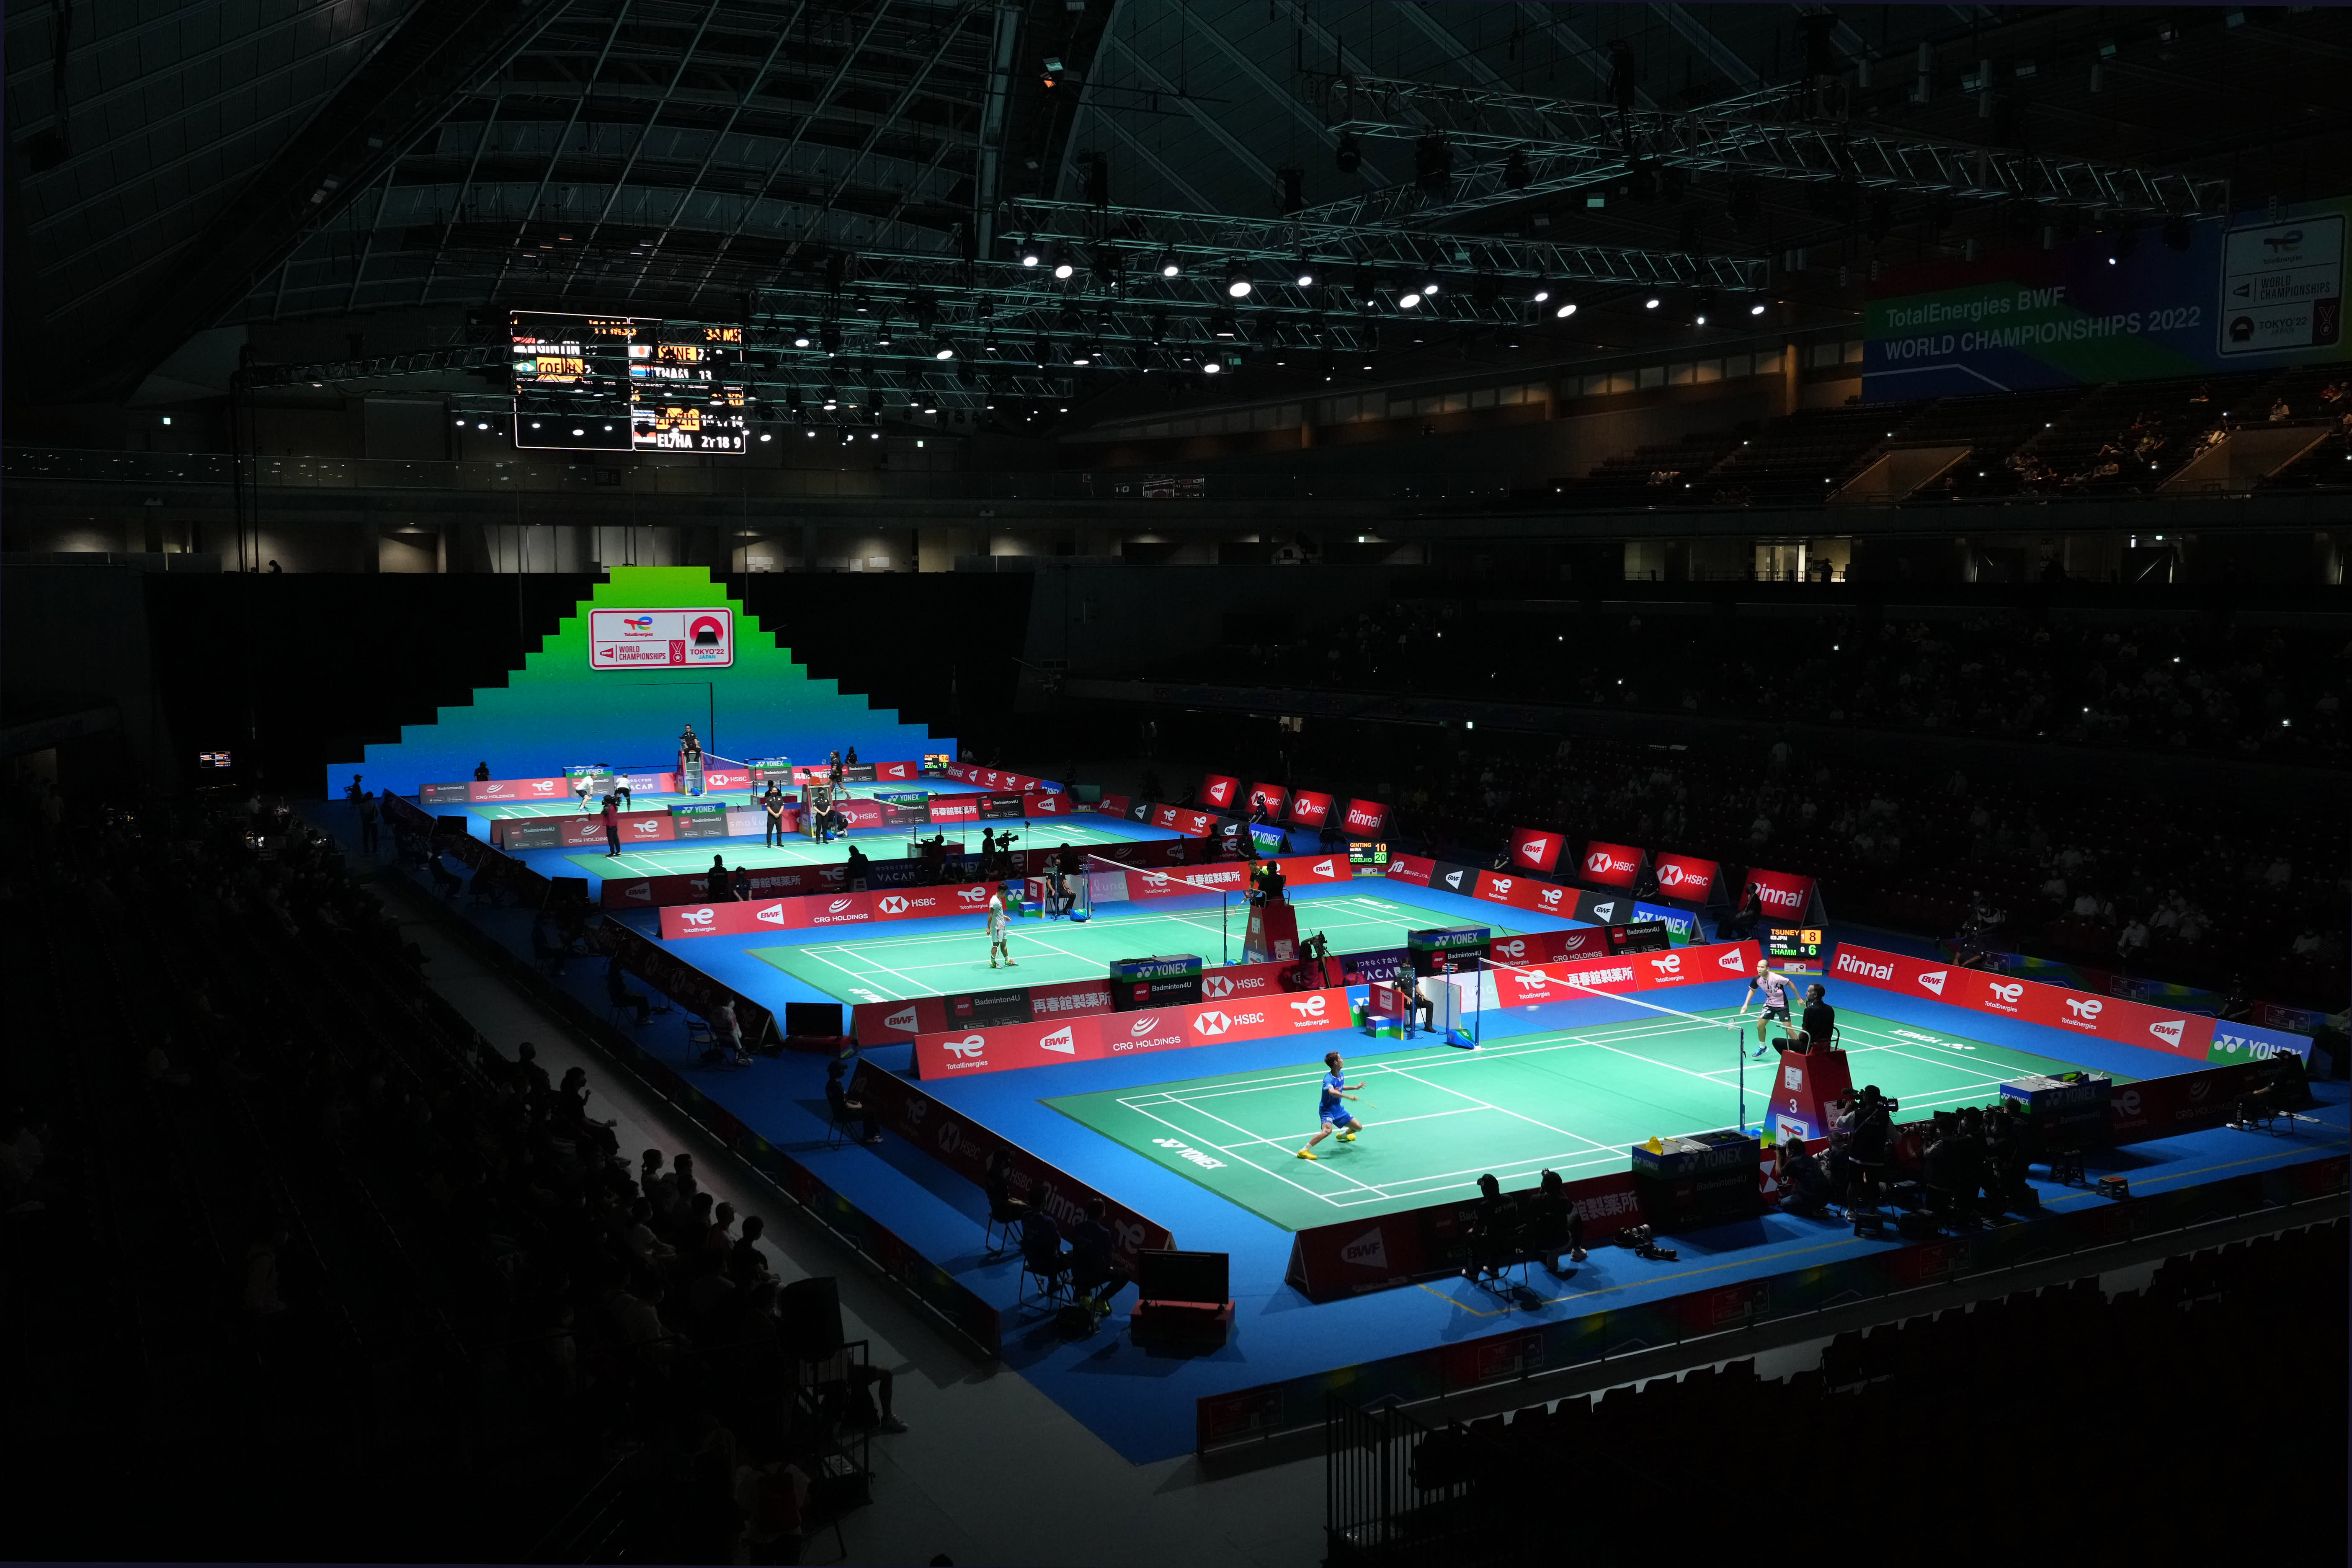 Badminton BWF World Championships 2022 Day 7 preview, order of play, how to watch finals